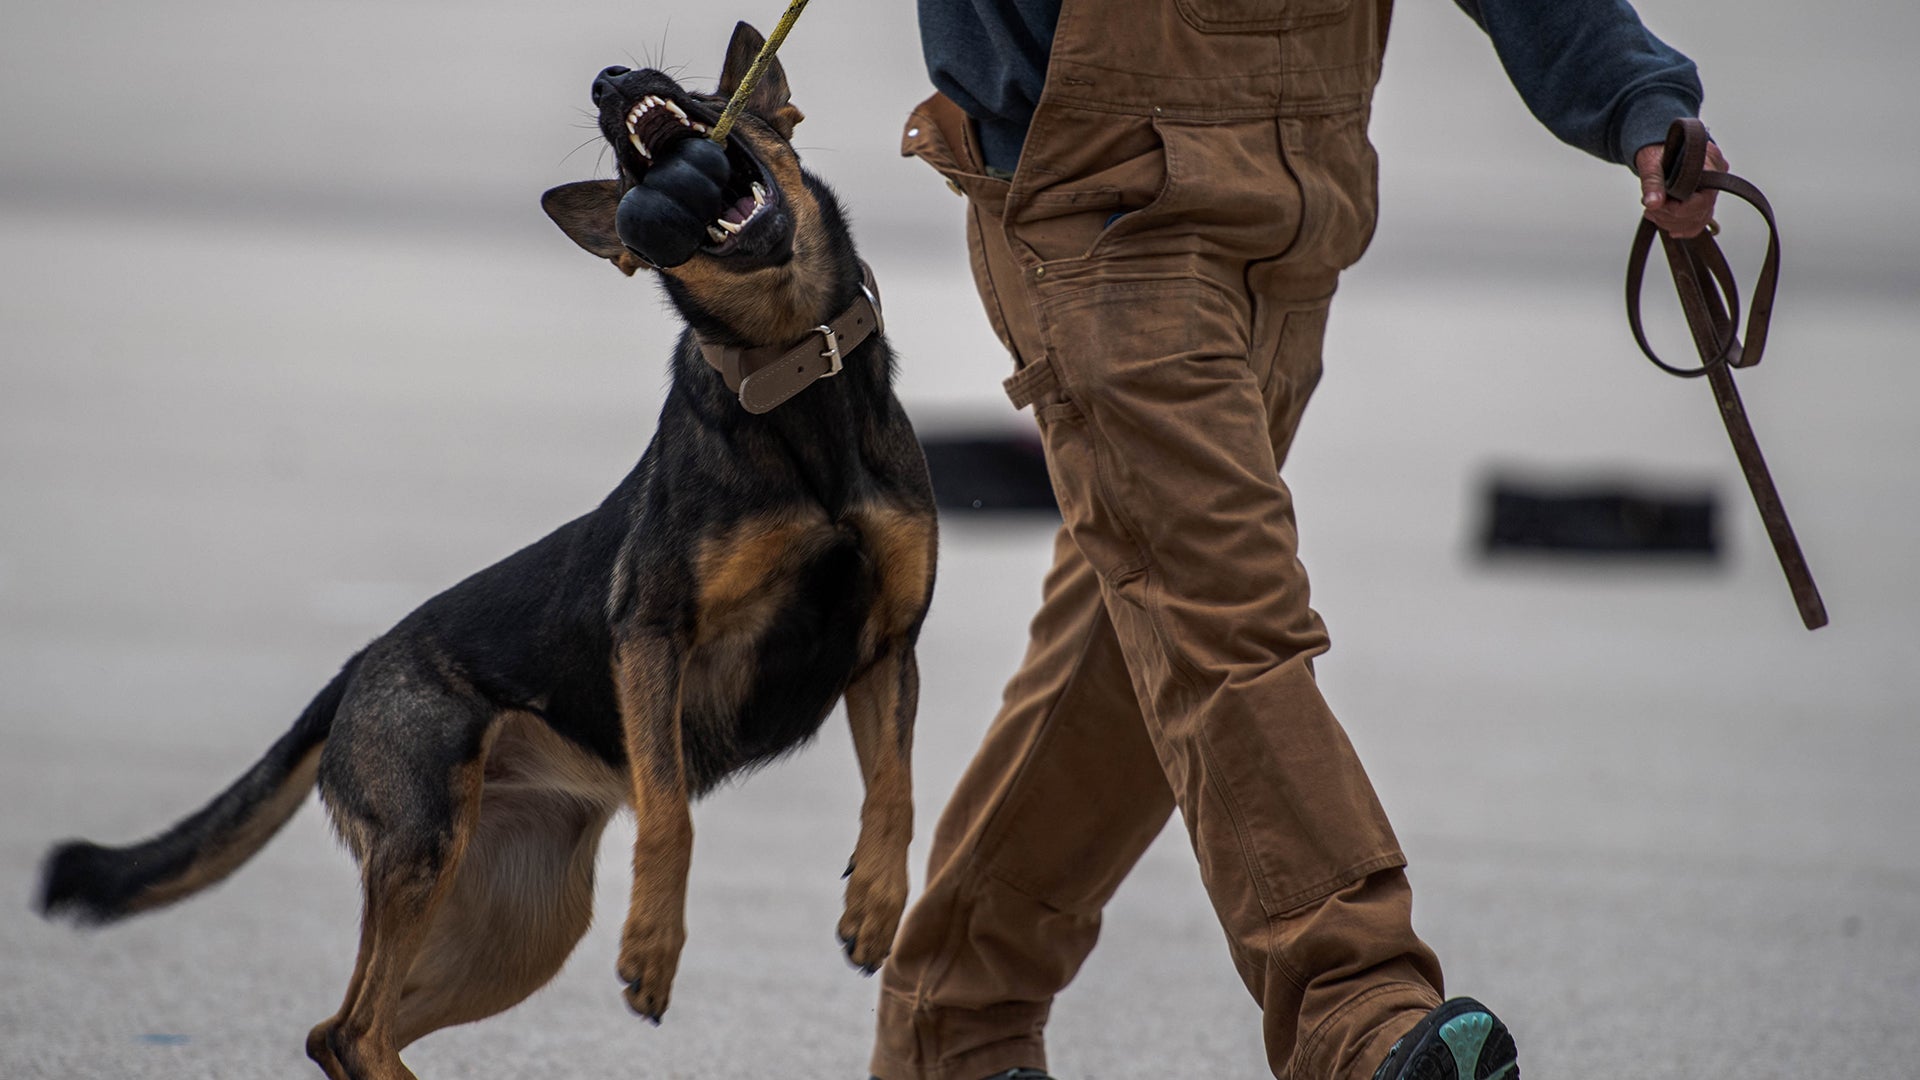 A U.S. Air Force Military Working dog plays with its handler after demonstrating its search and alert skills during the Military Working Dog Expo, November 18, 2022, on Lackland Air Force Base, Texas. This is the first Military Working Dog Expo put on by the 341st Training Wing and is designed to allow dogs and their handlers to show off their capabilities and training. (U.S. Air Force Photograph by Airman 1st Class Erin V. Currie)